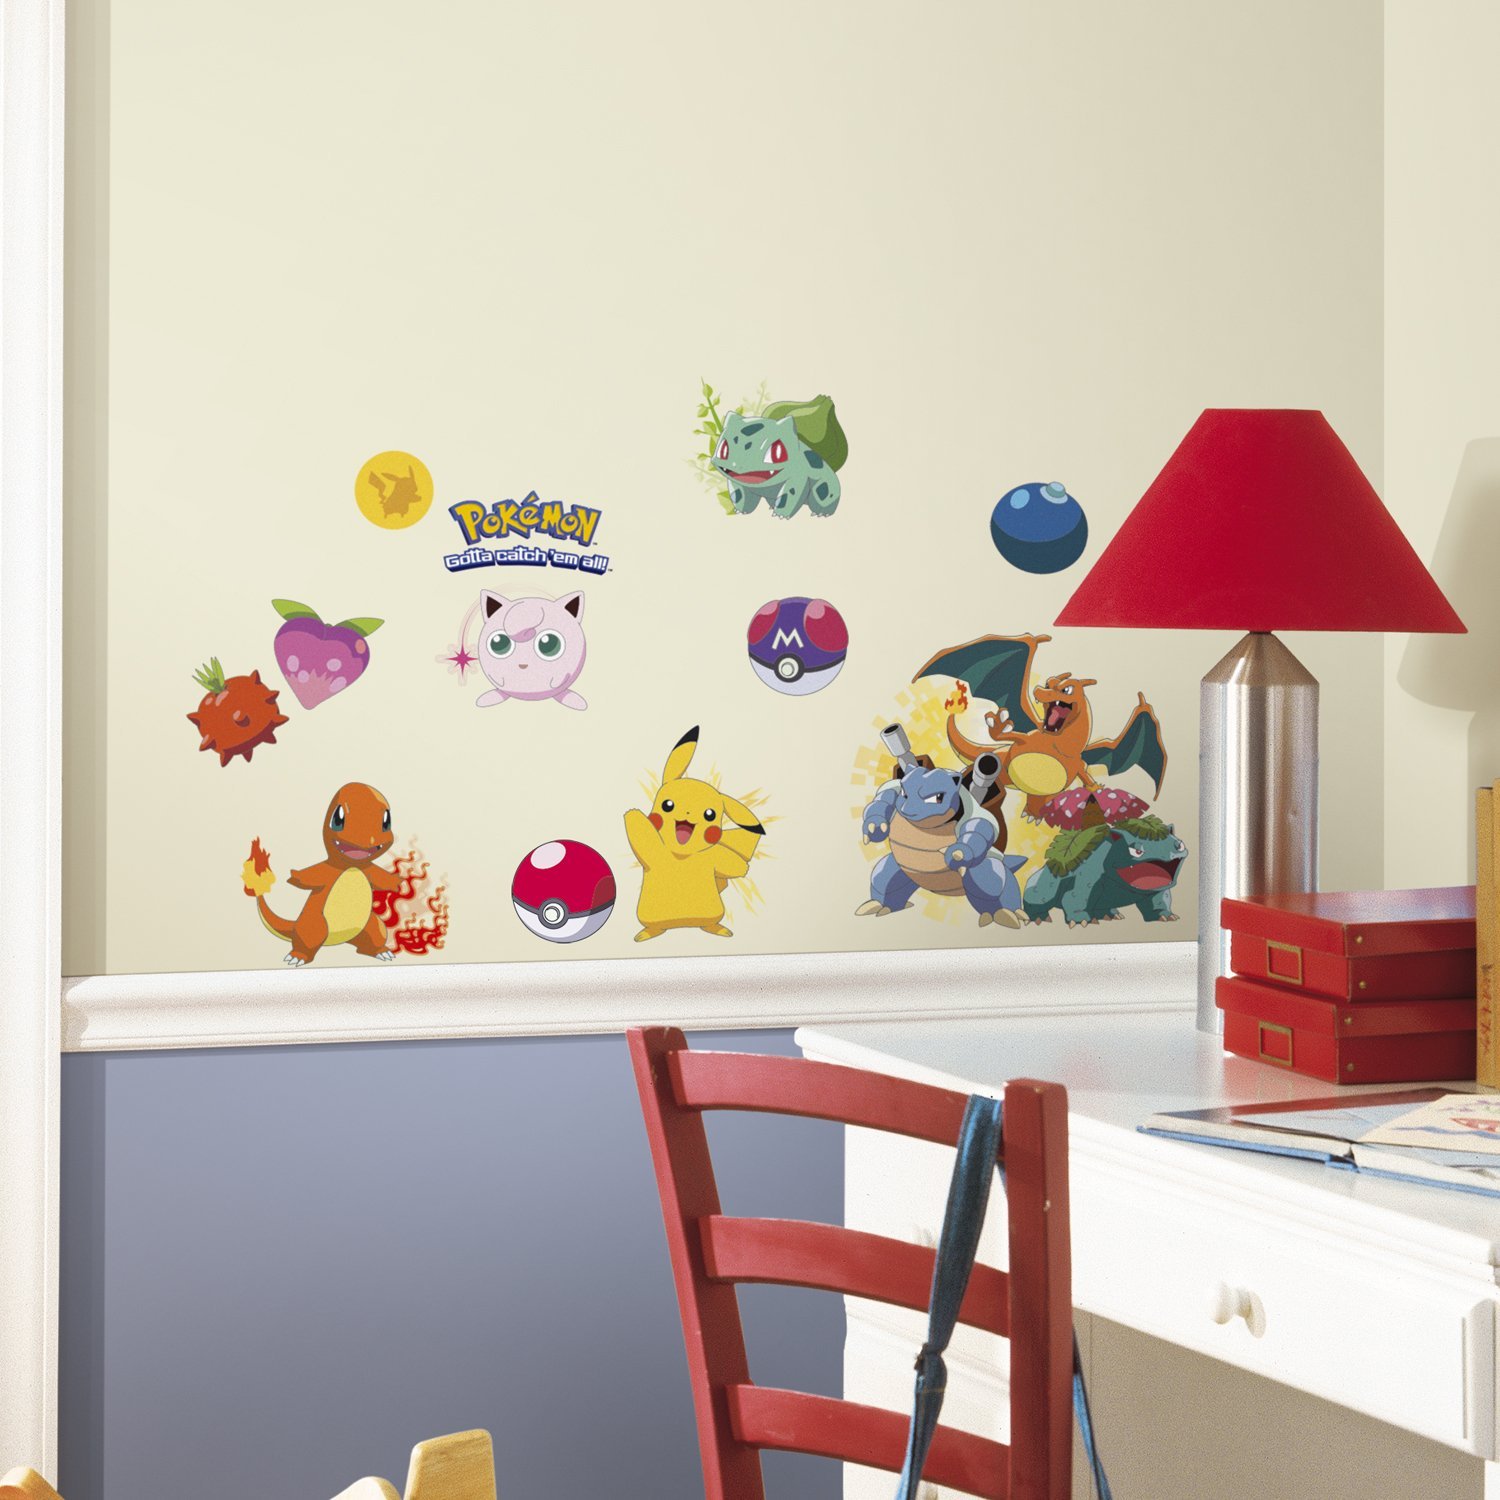 Small packs of Pokémon stickers allow your kids to get creative and decorate the room themselves.